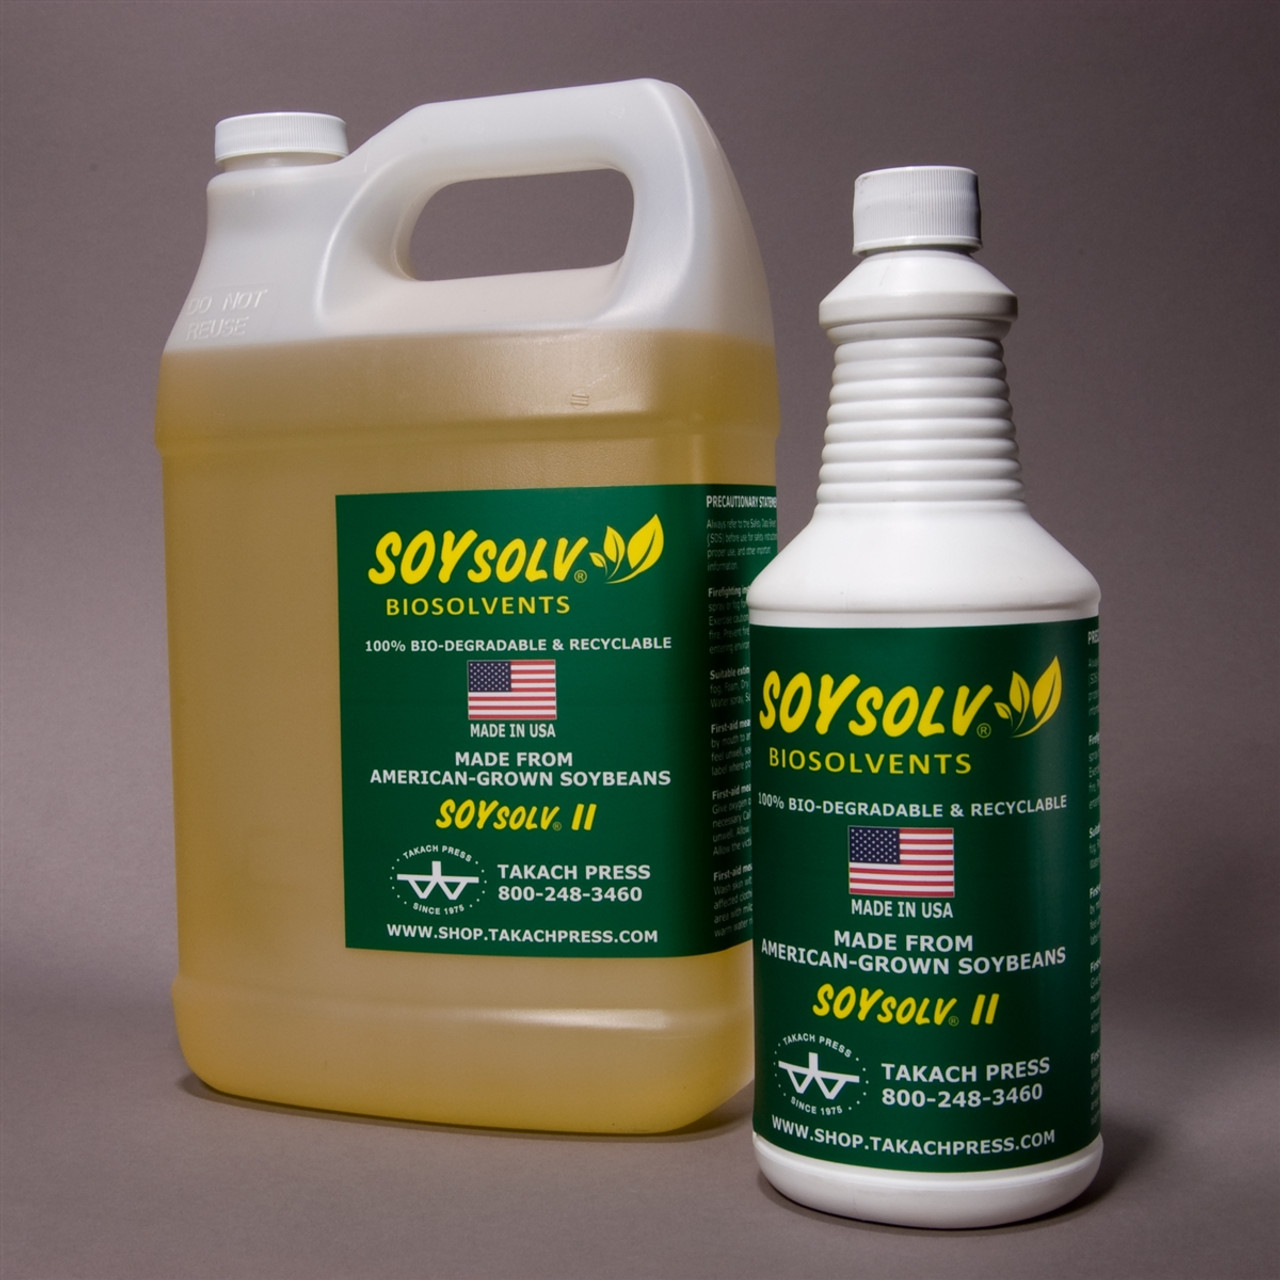 Gallon Of Cleaning Solution For Garment Printers